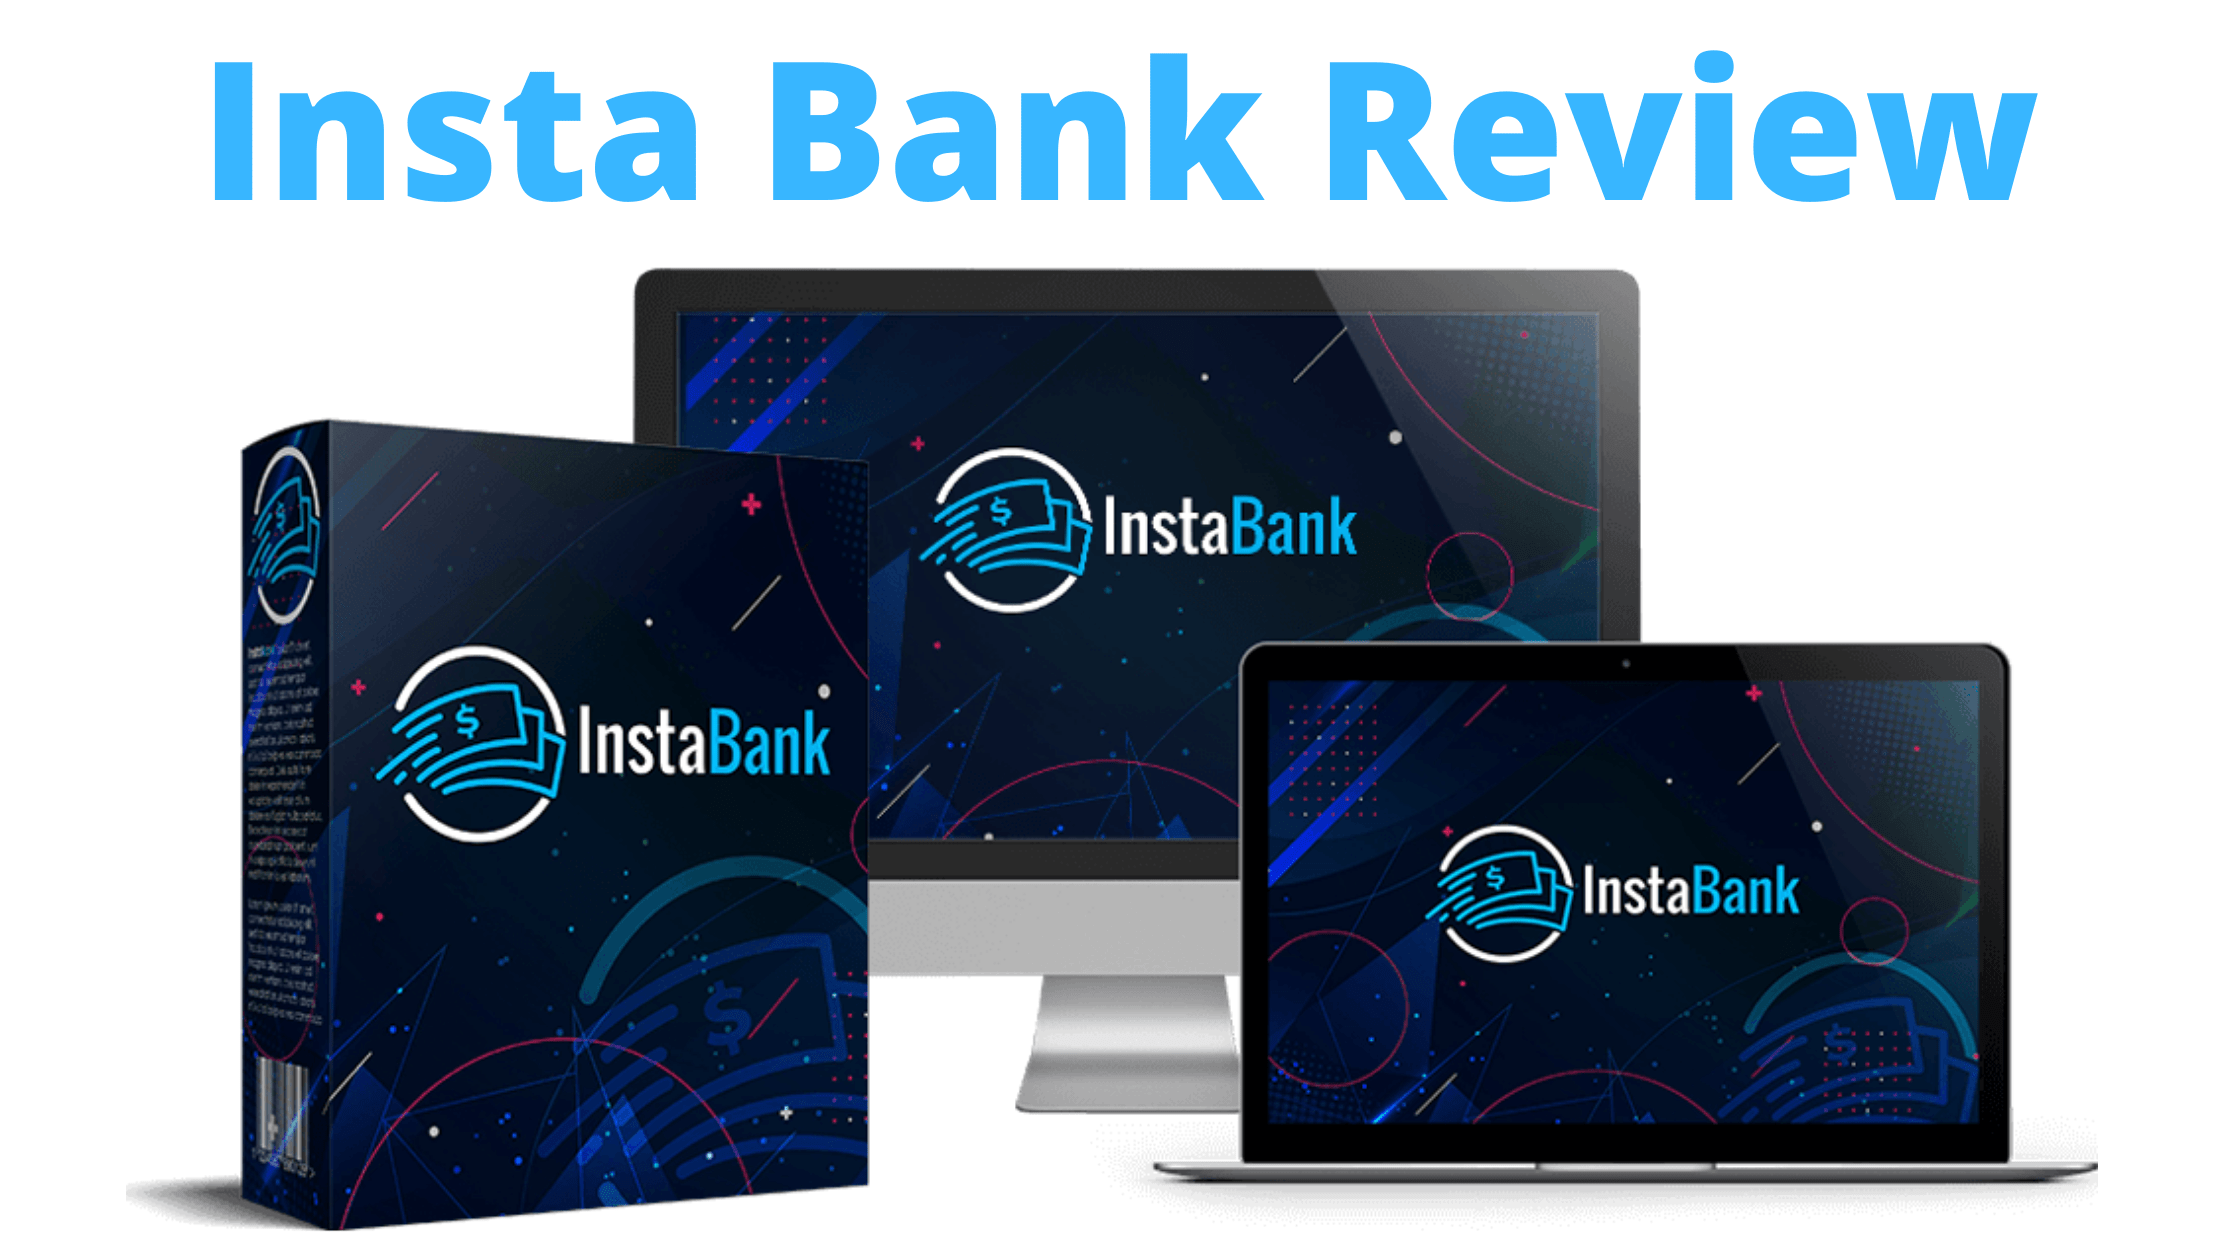 Insta Bank Review